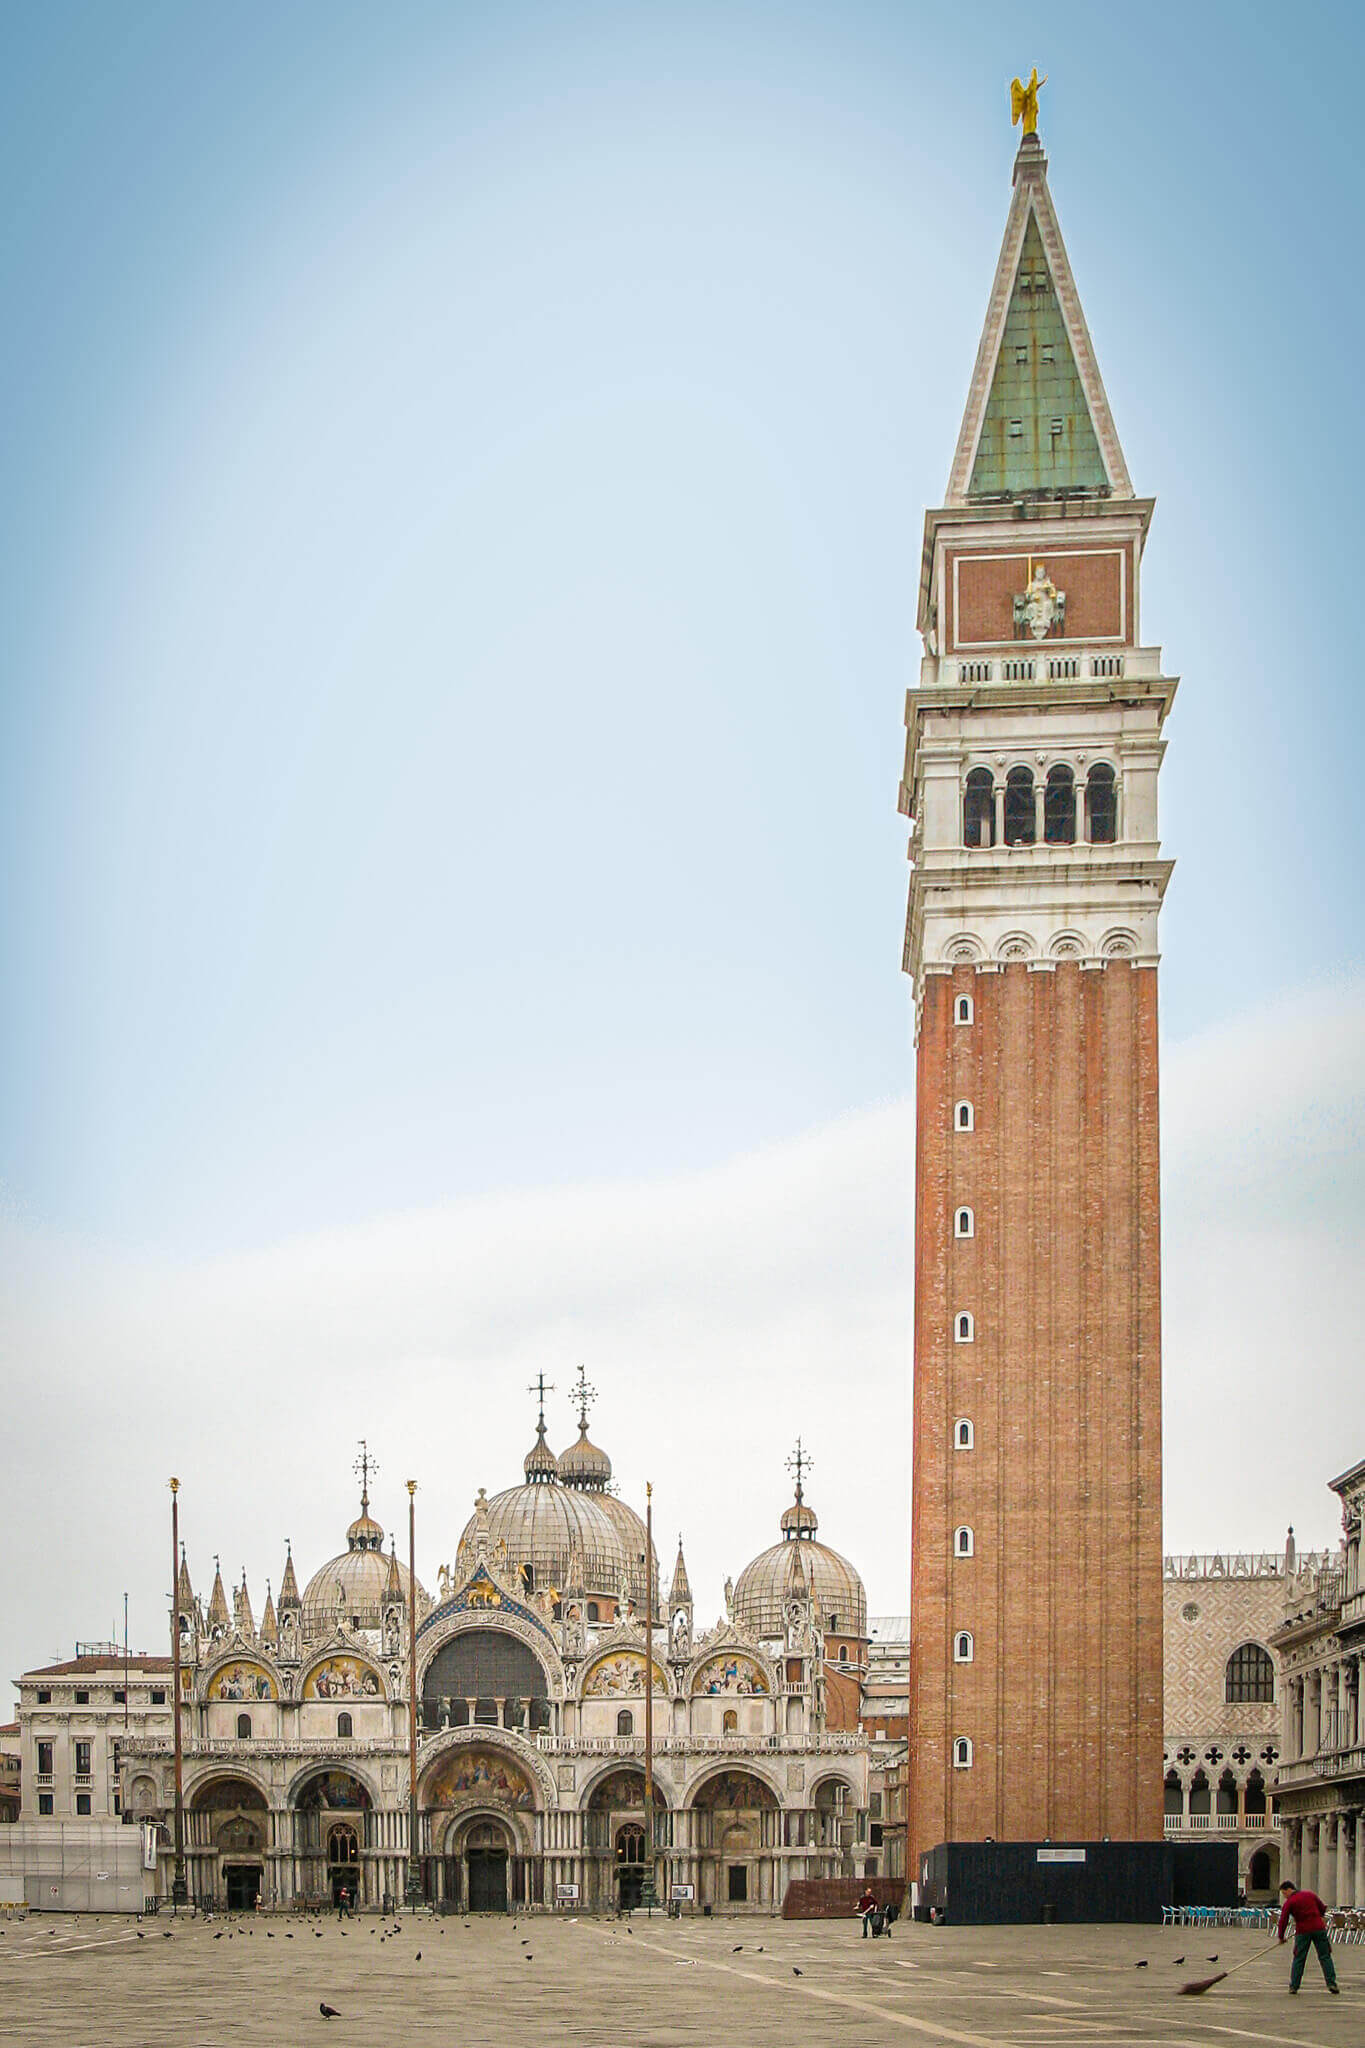 Piazza San Marco with the Basilica and bell tower